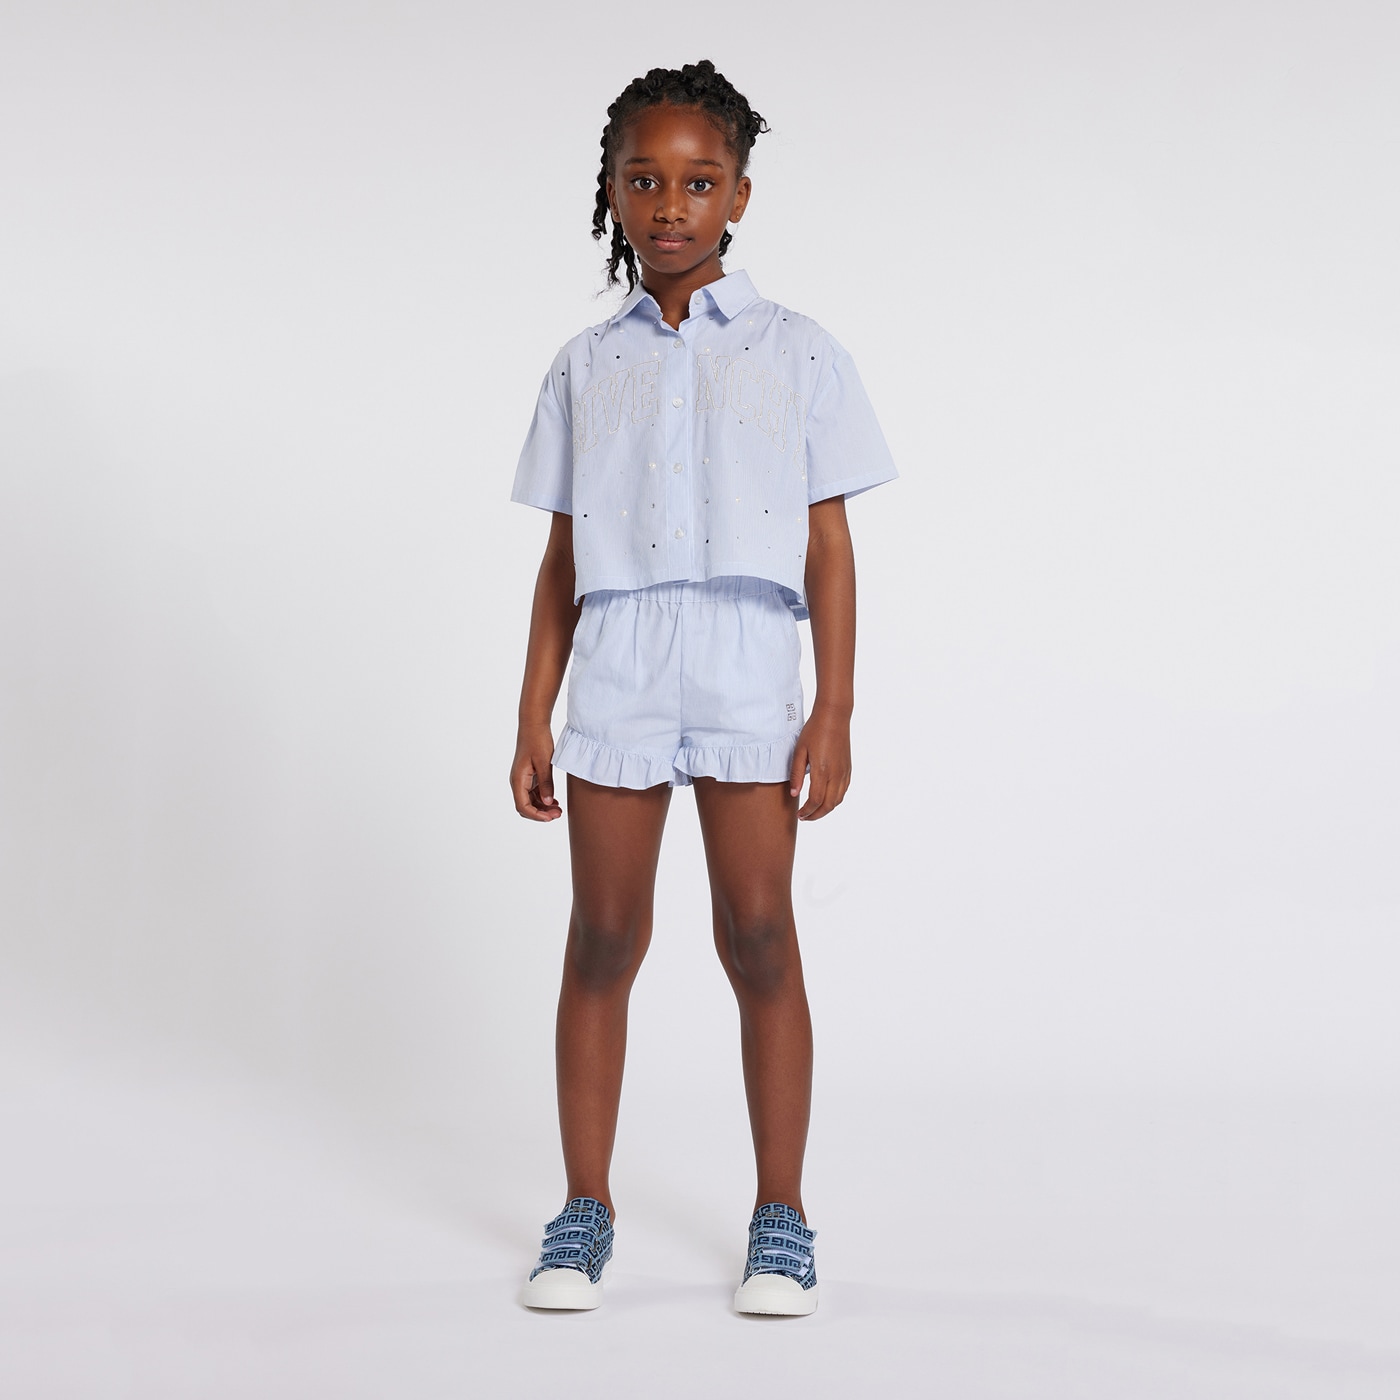 GIVENCHY KIDS SPRING/SUMMER 2021 - FASHION'S DAY OUT by JUNIOR LOOKBOOK